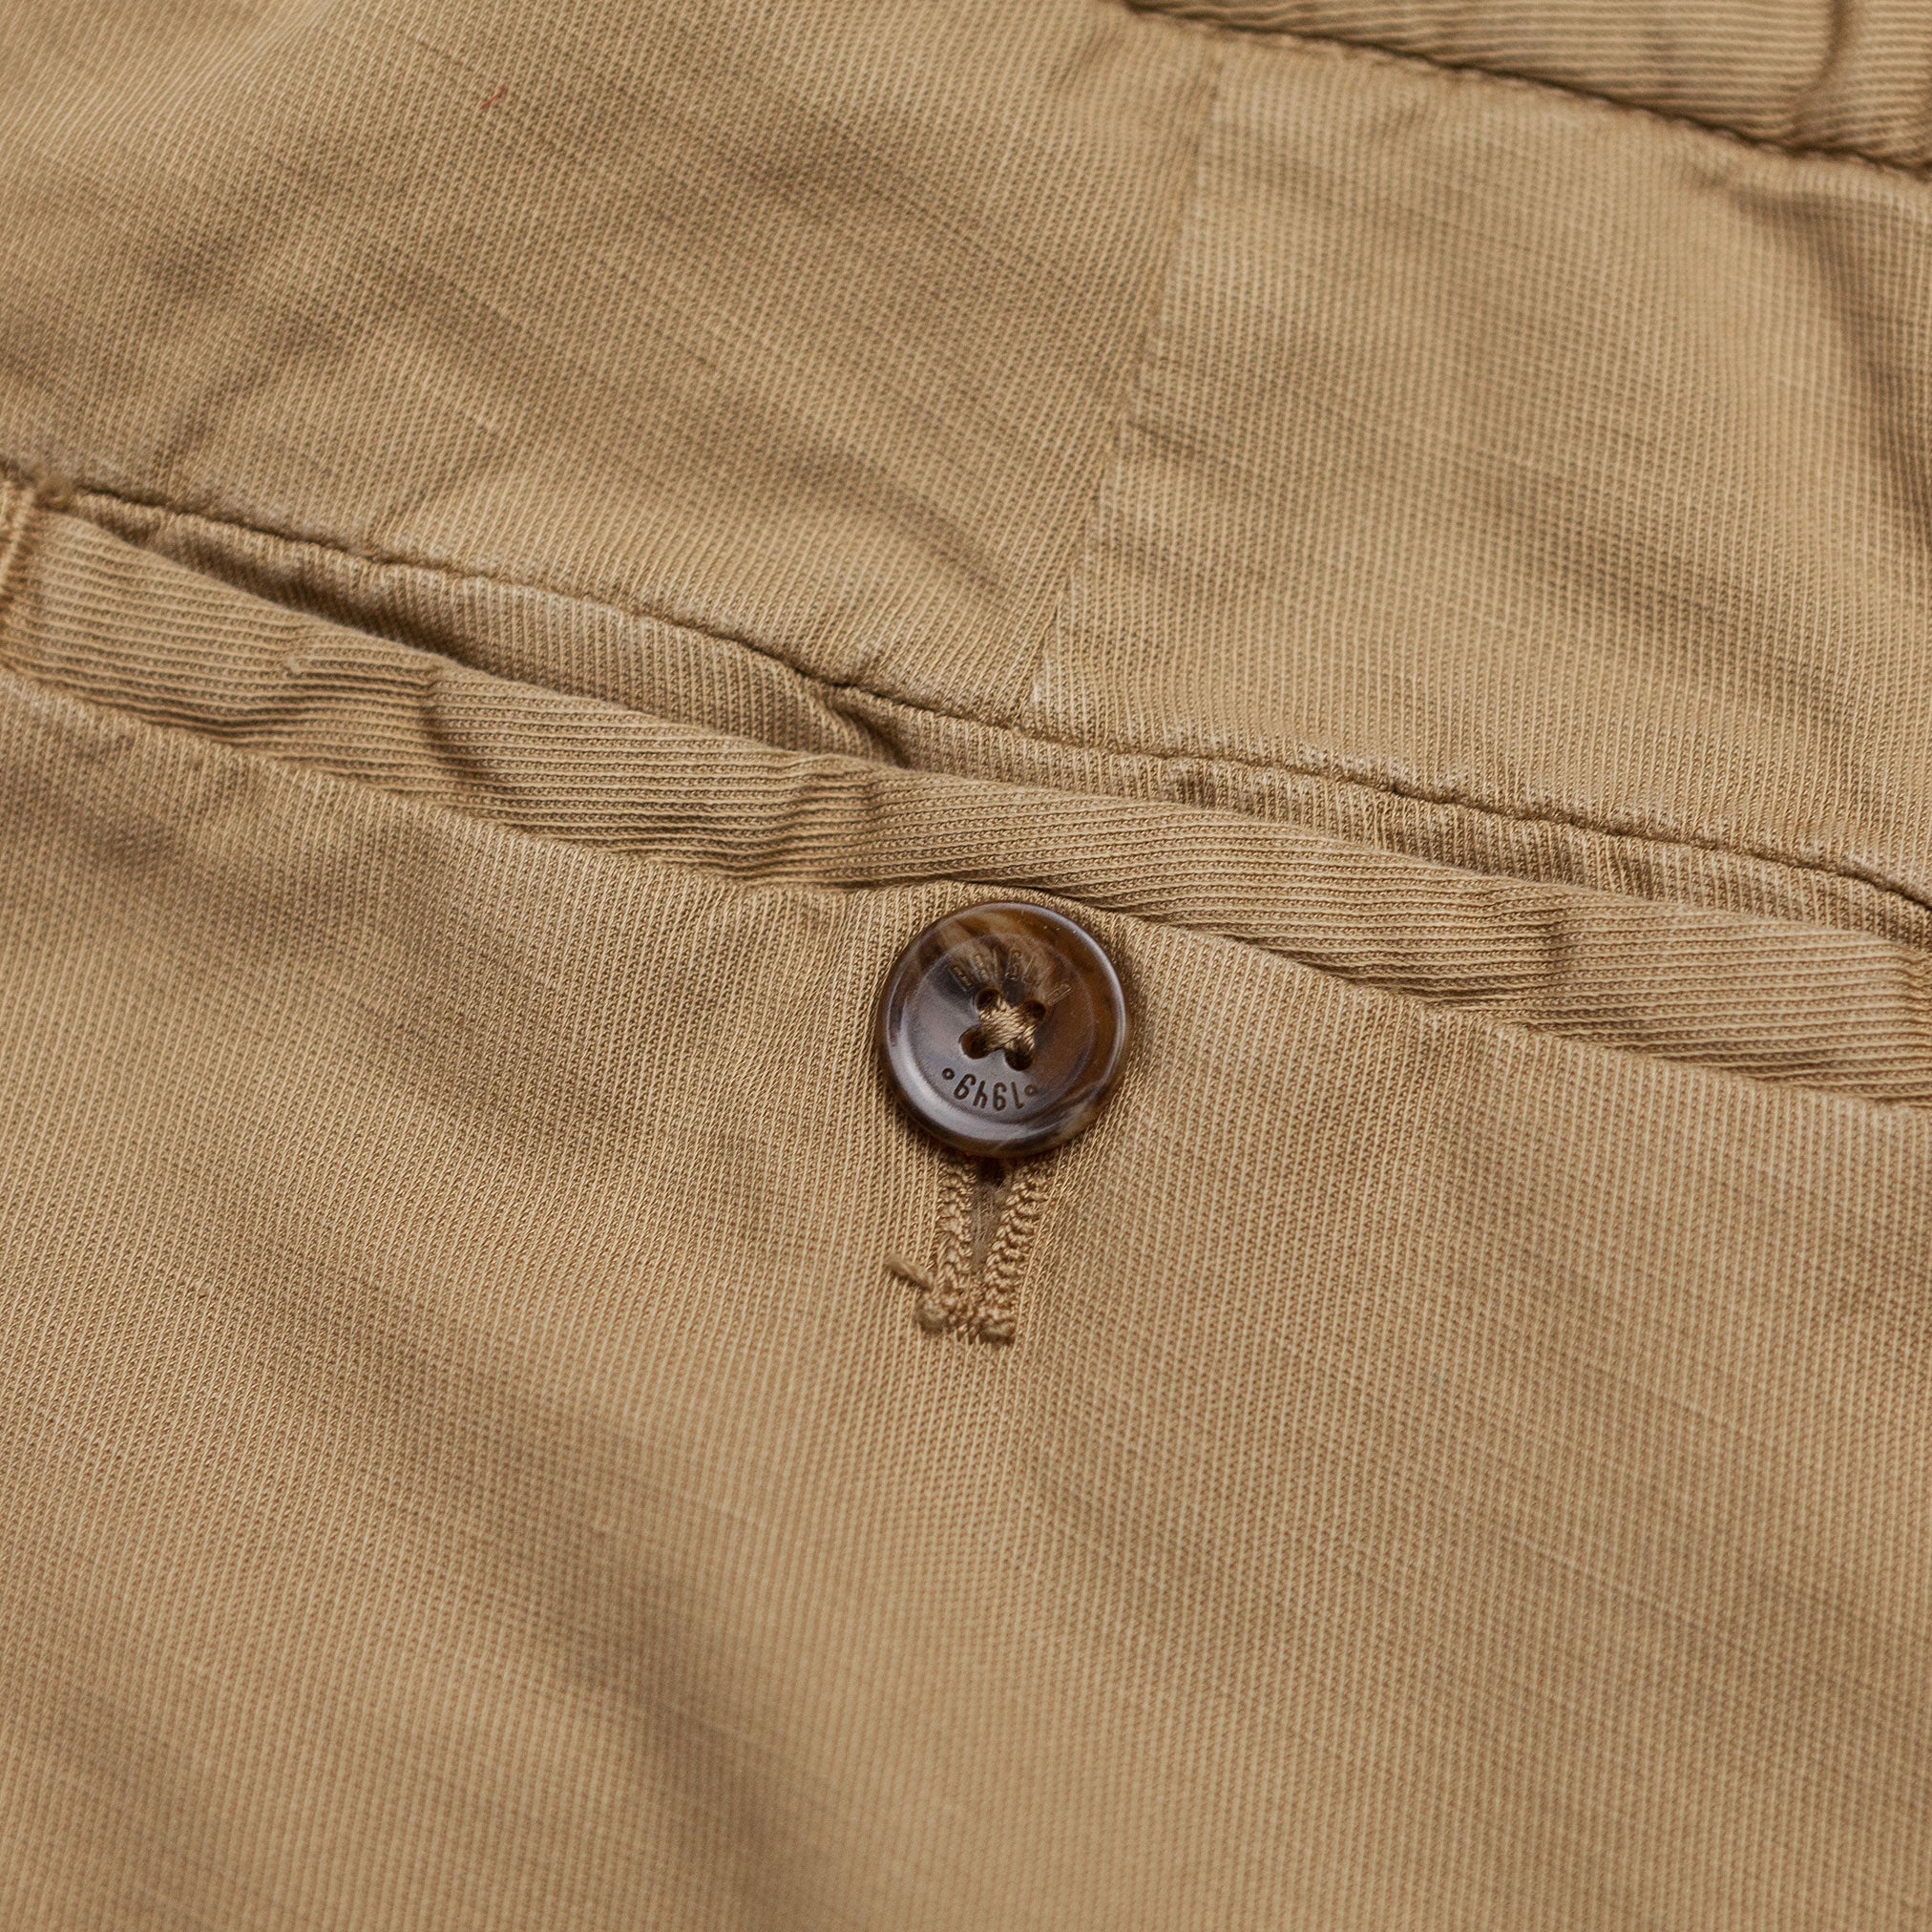 Chinos in Cotton & Linen Tan Twill